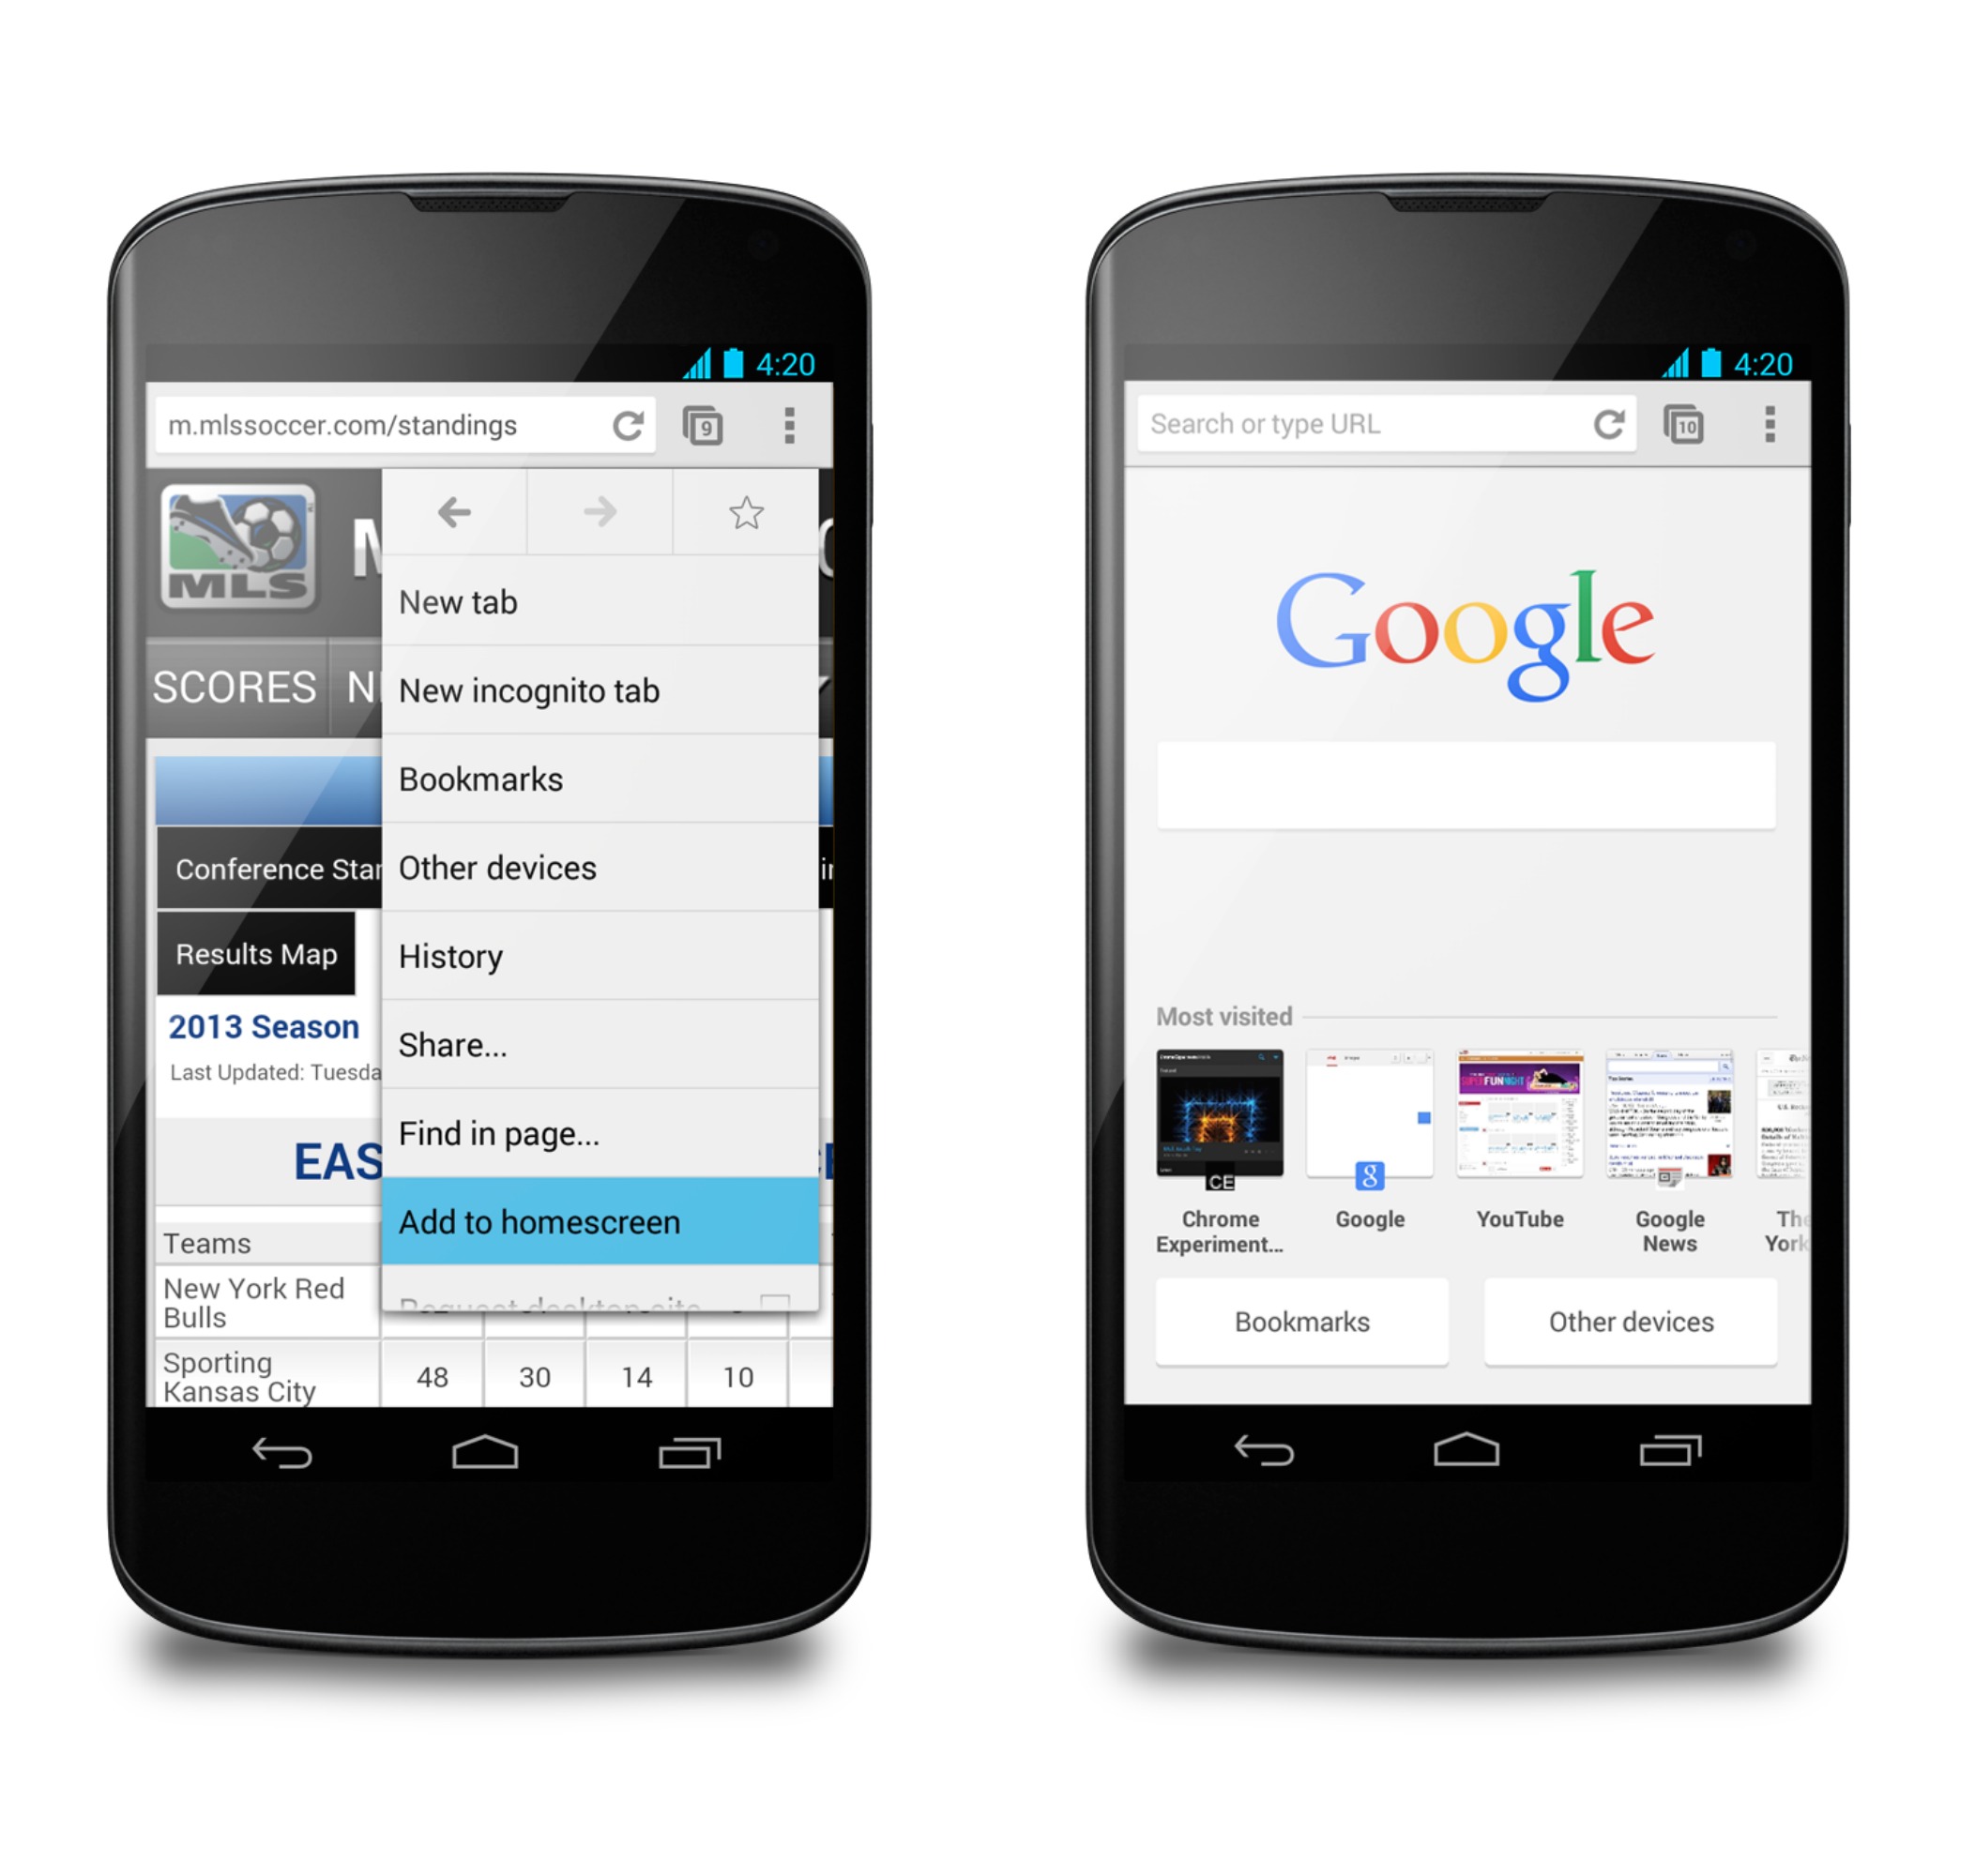 google chrome for android version 4.0.3